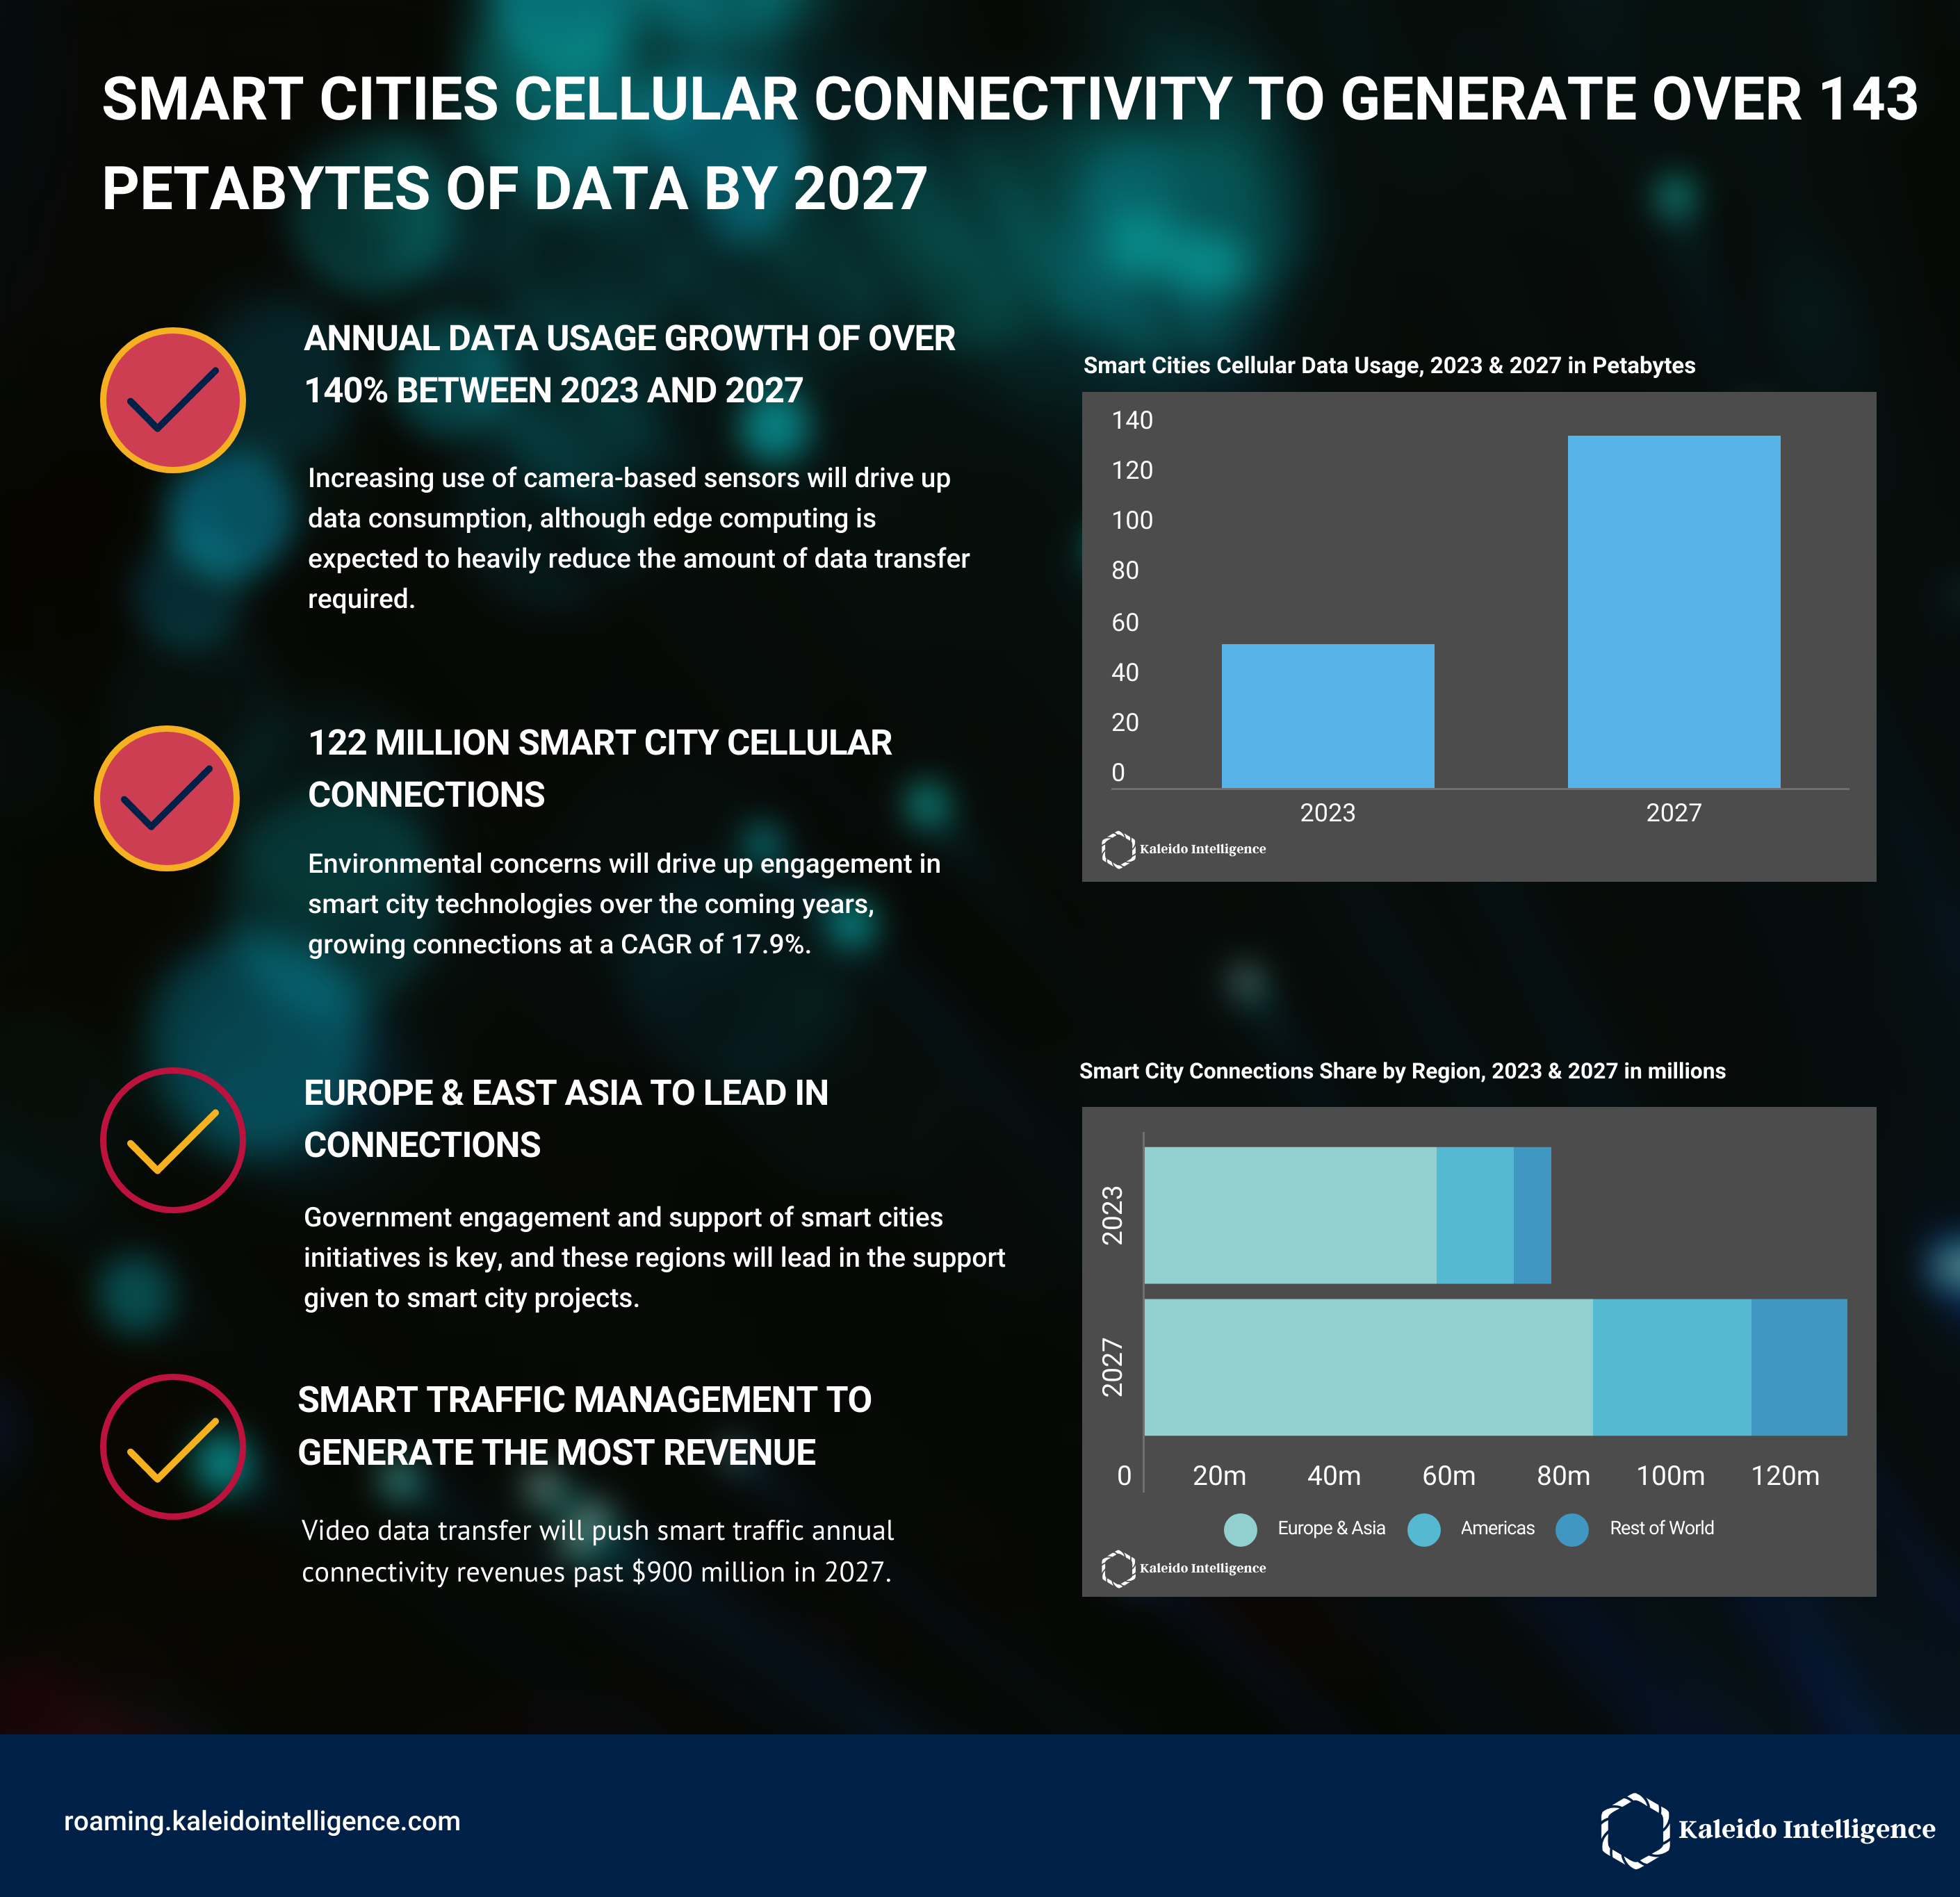 A new report from Kaleido Intelligence, a leading connectivity market intelligence and consulting firm, has found that smart cities’ data usage will increase by over 140% between 2023 and 2027.